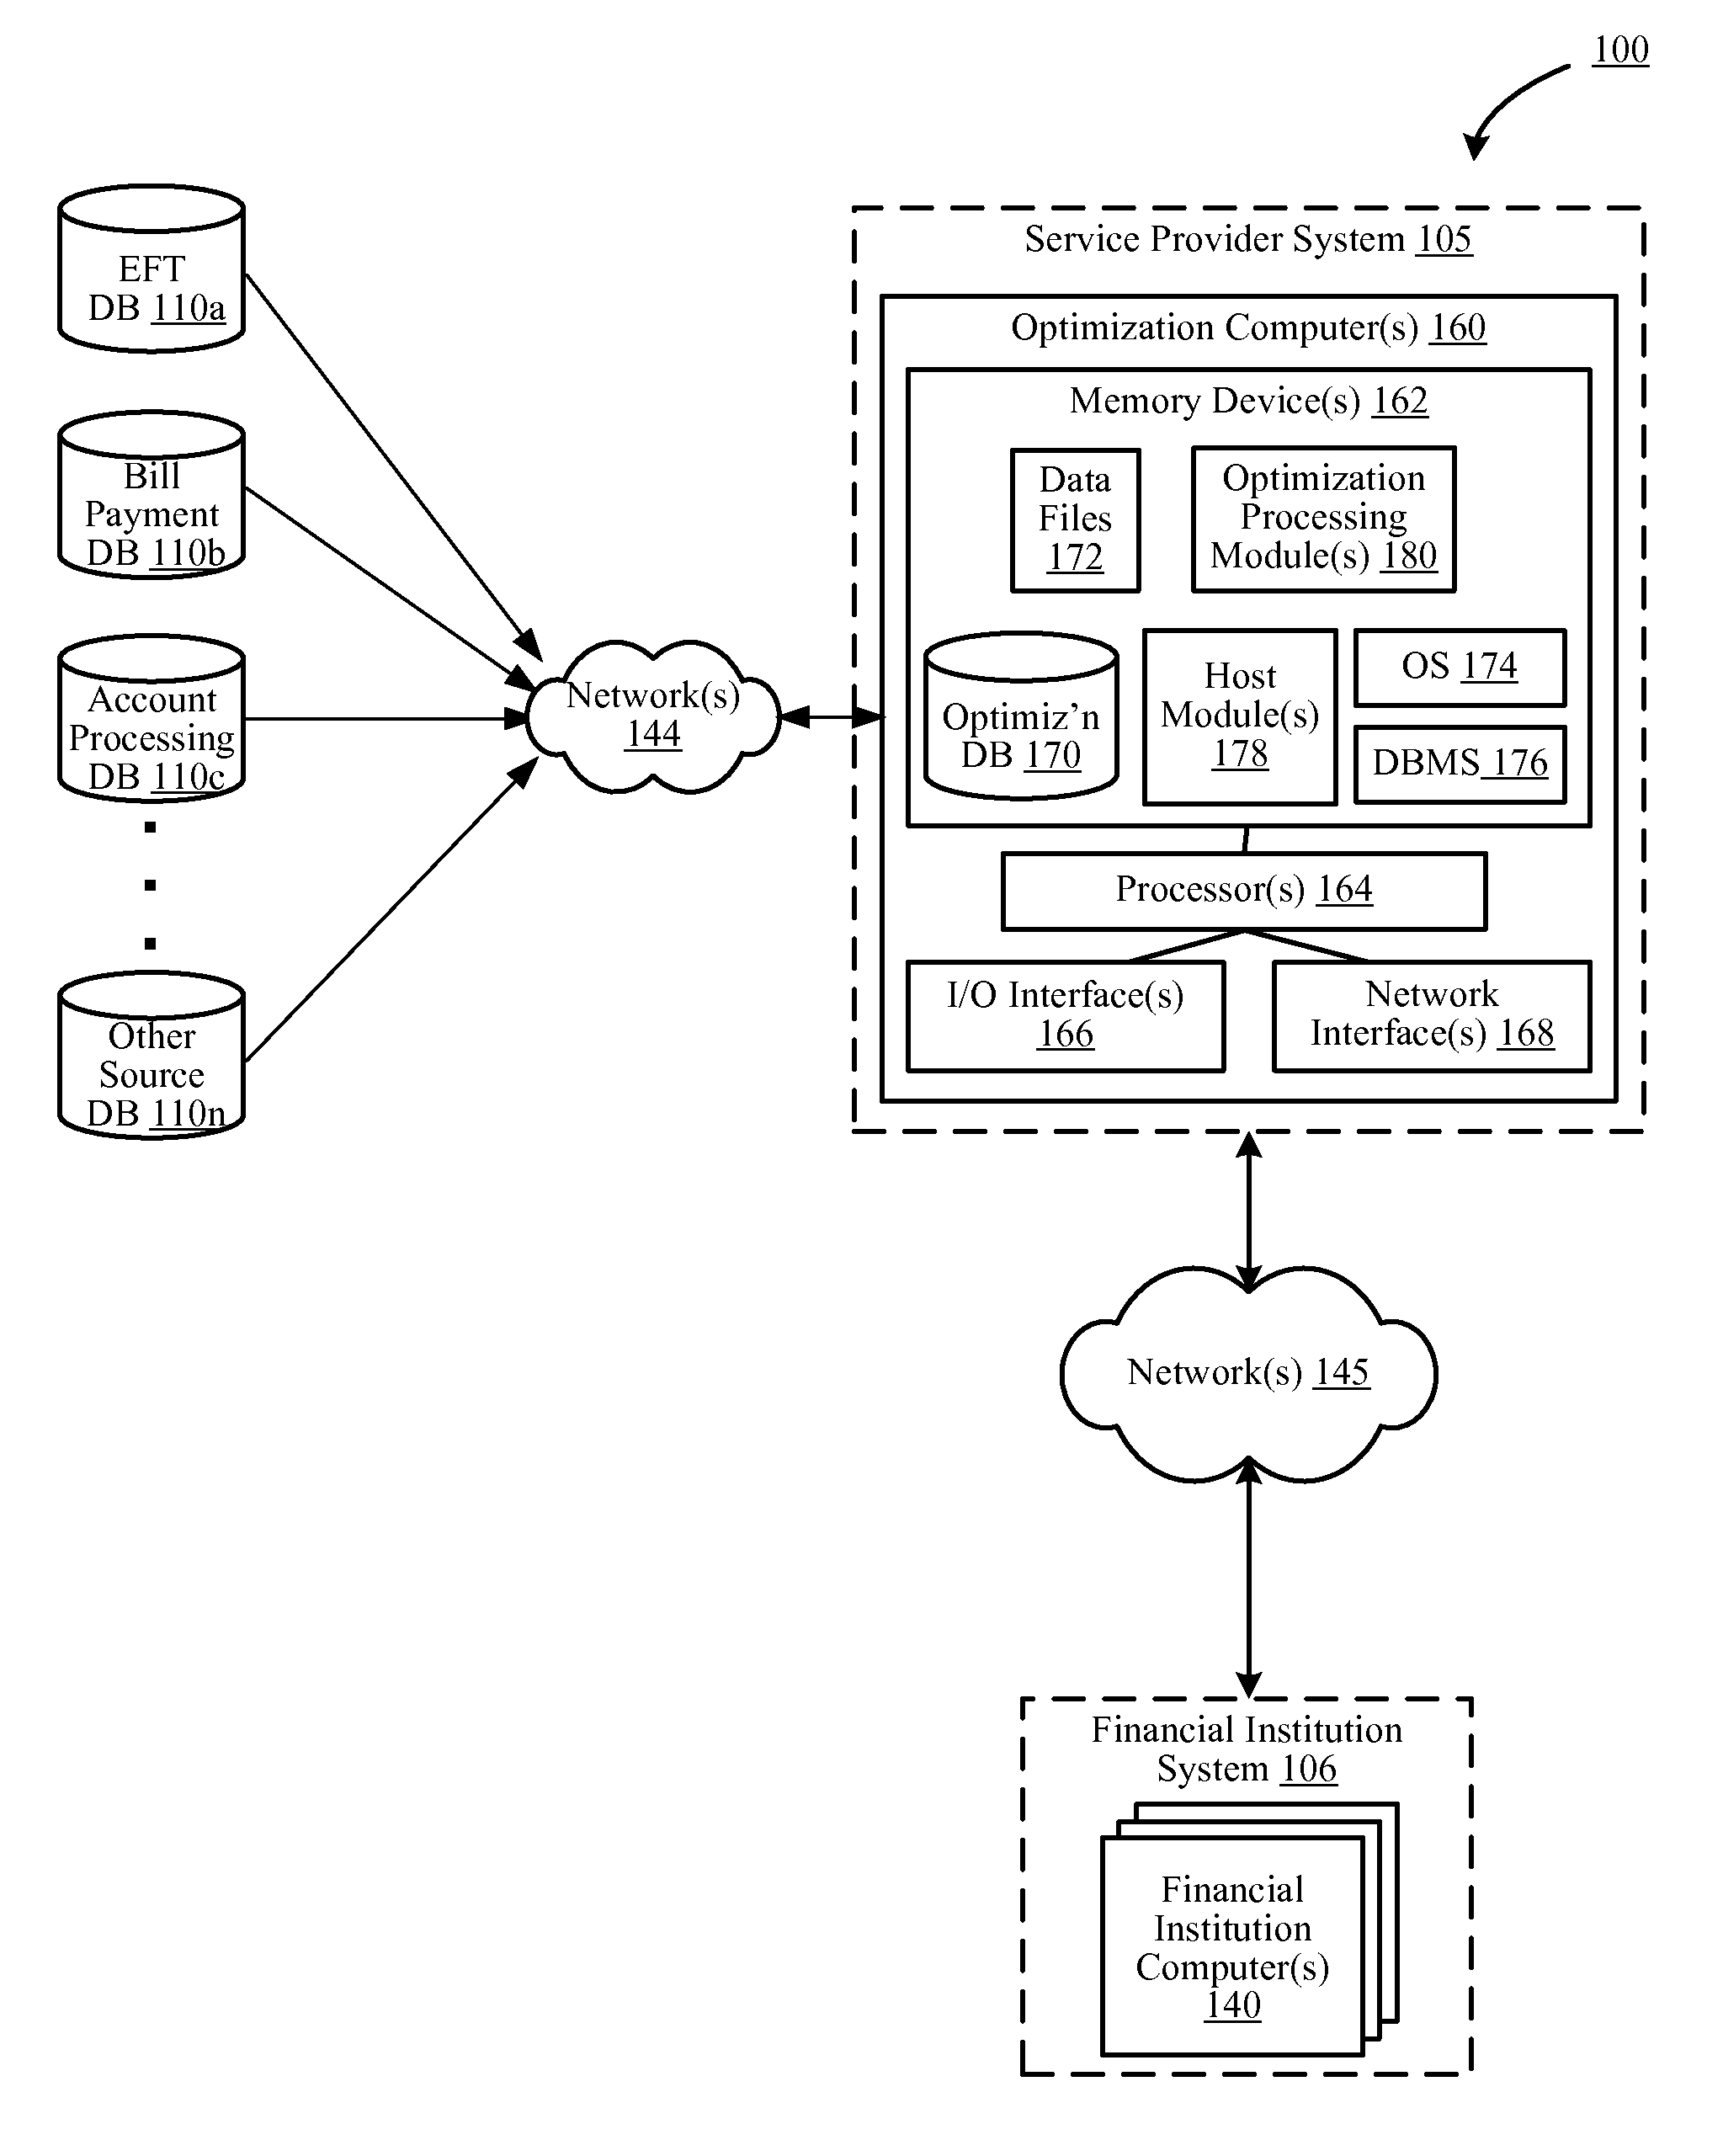 Systems and methods for customer value optimization involving relationship optimization